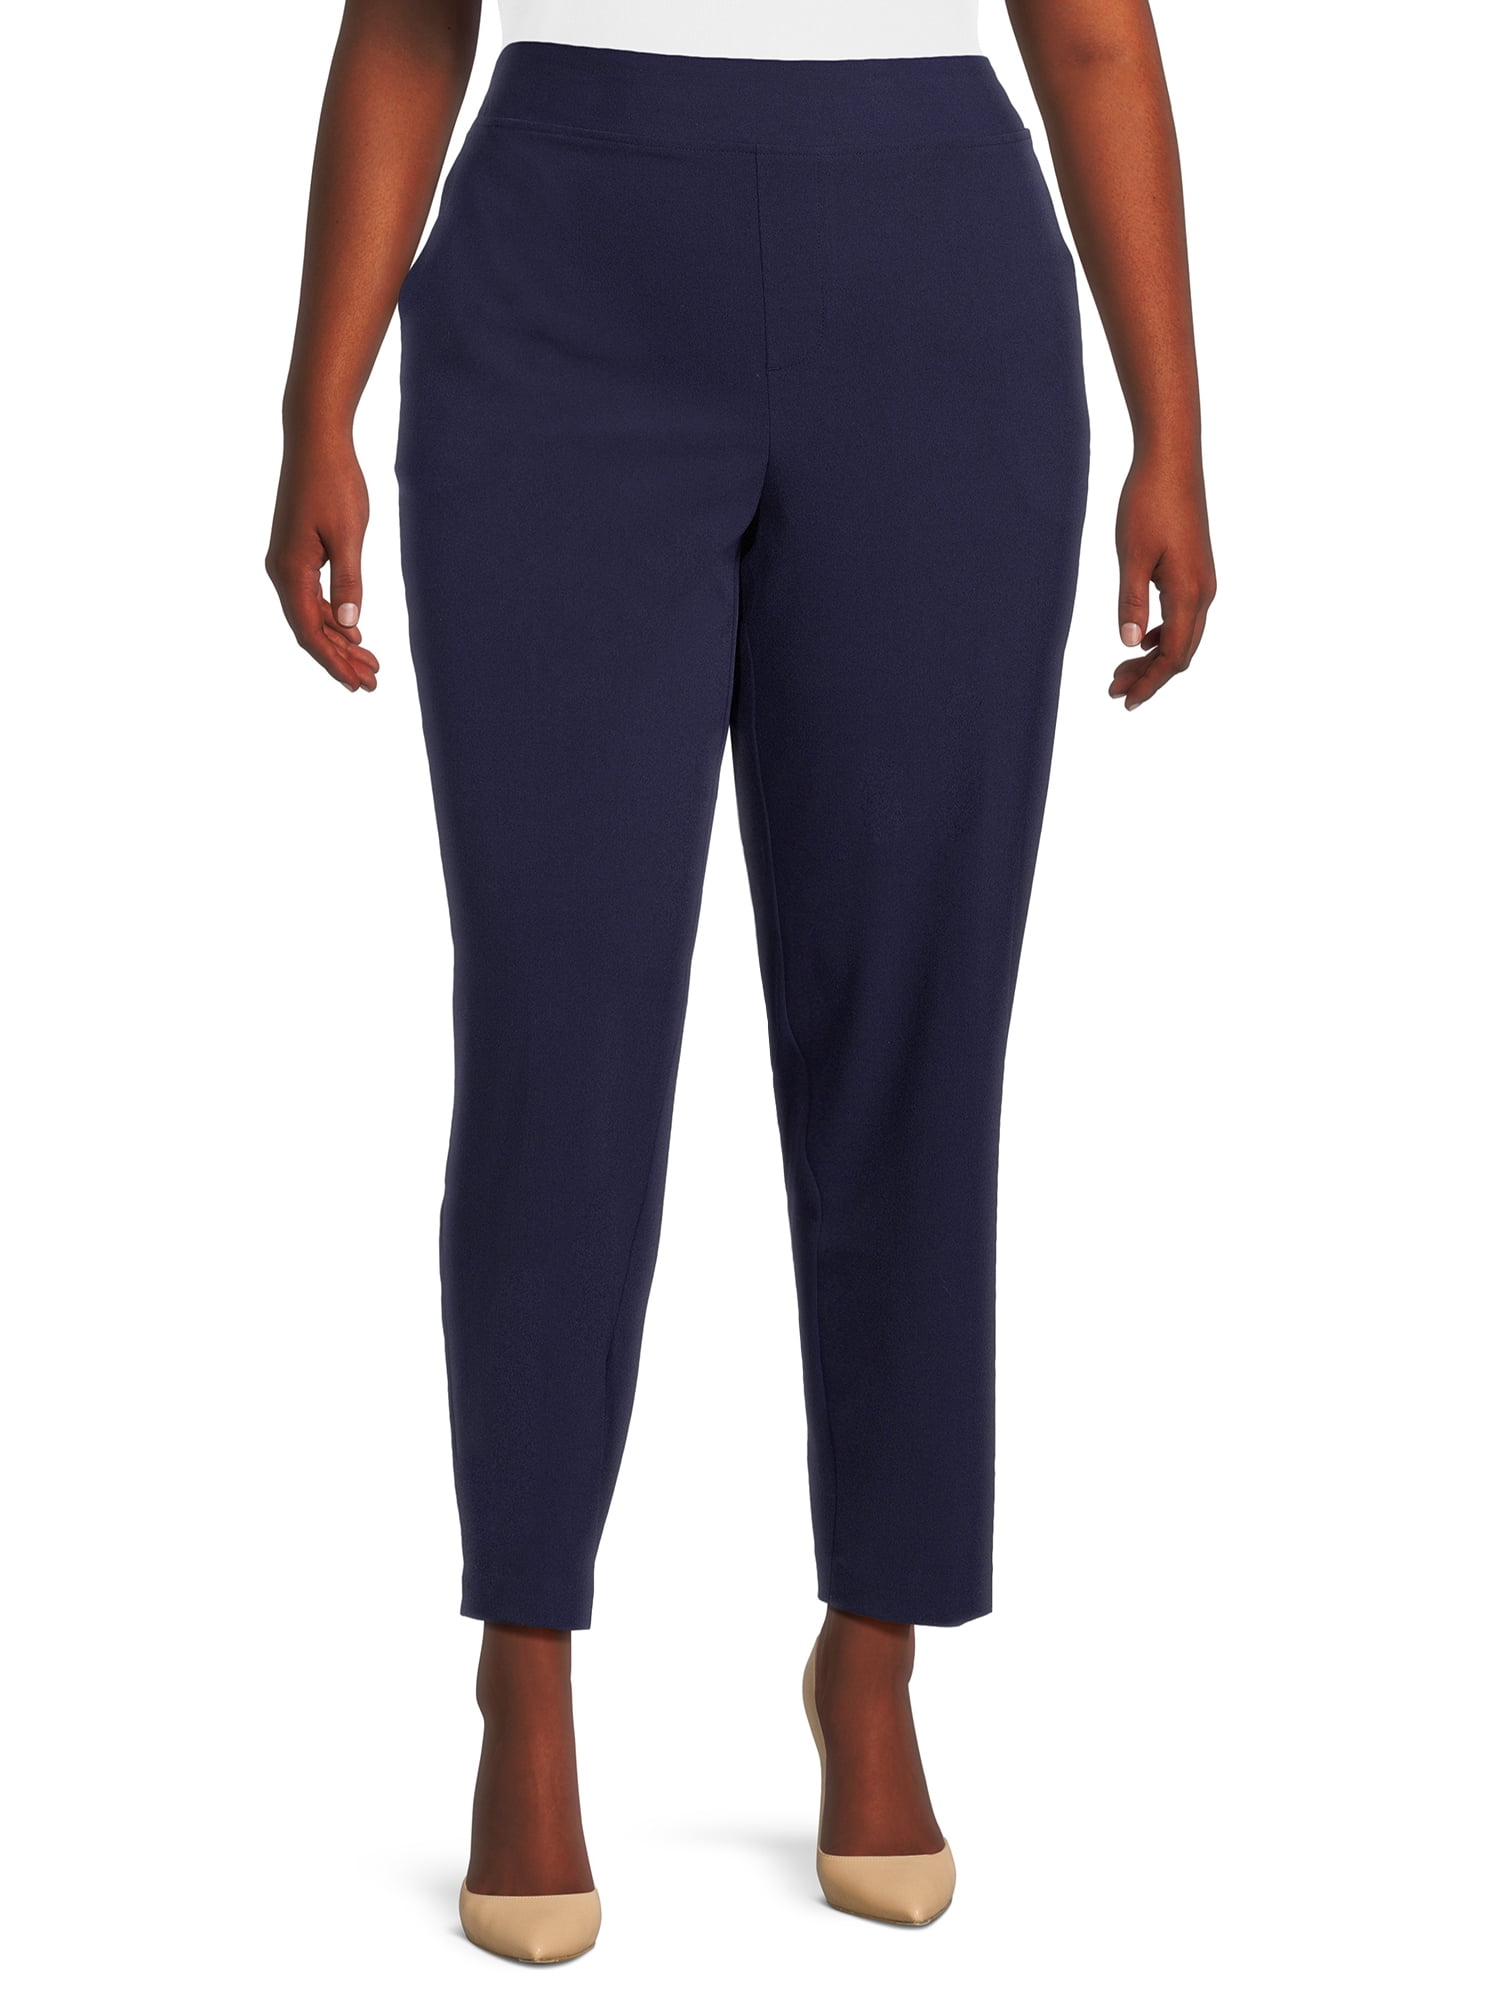 Just My Size Women's Plus Size Tummy Control Pull-On Dress Pants 